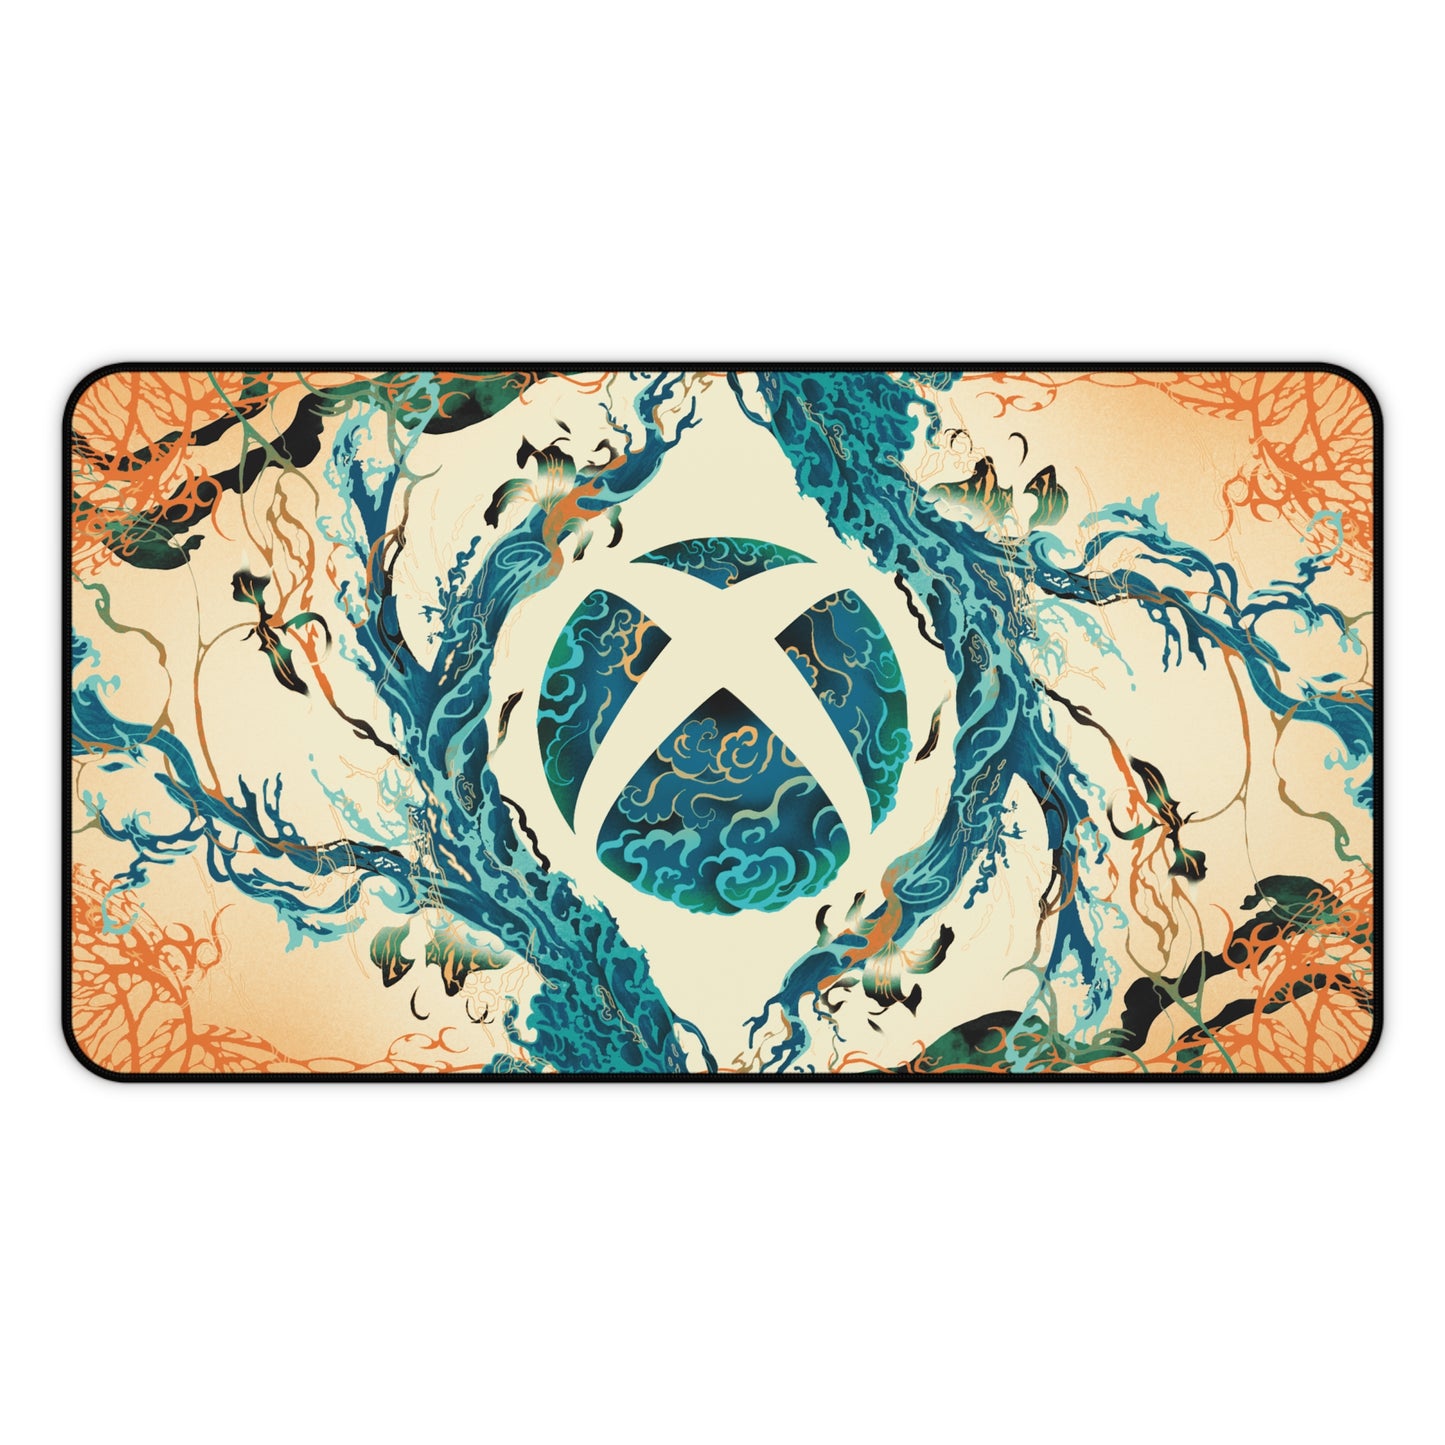 Xbox Japanese High Definition Game Office Home Video Game PC Desk Mat Mousepad